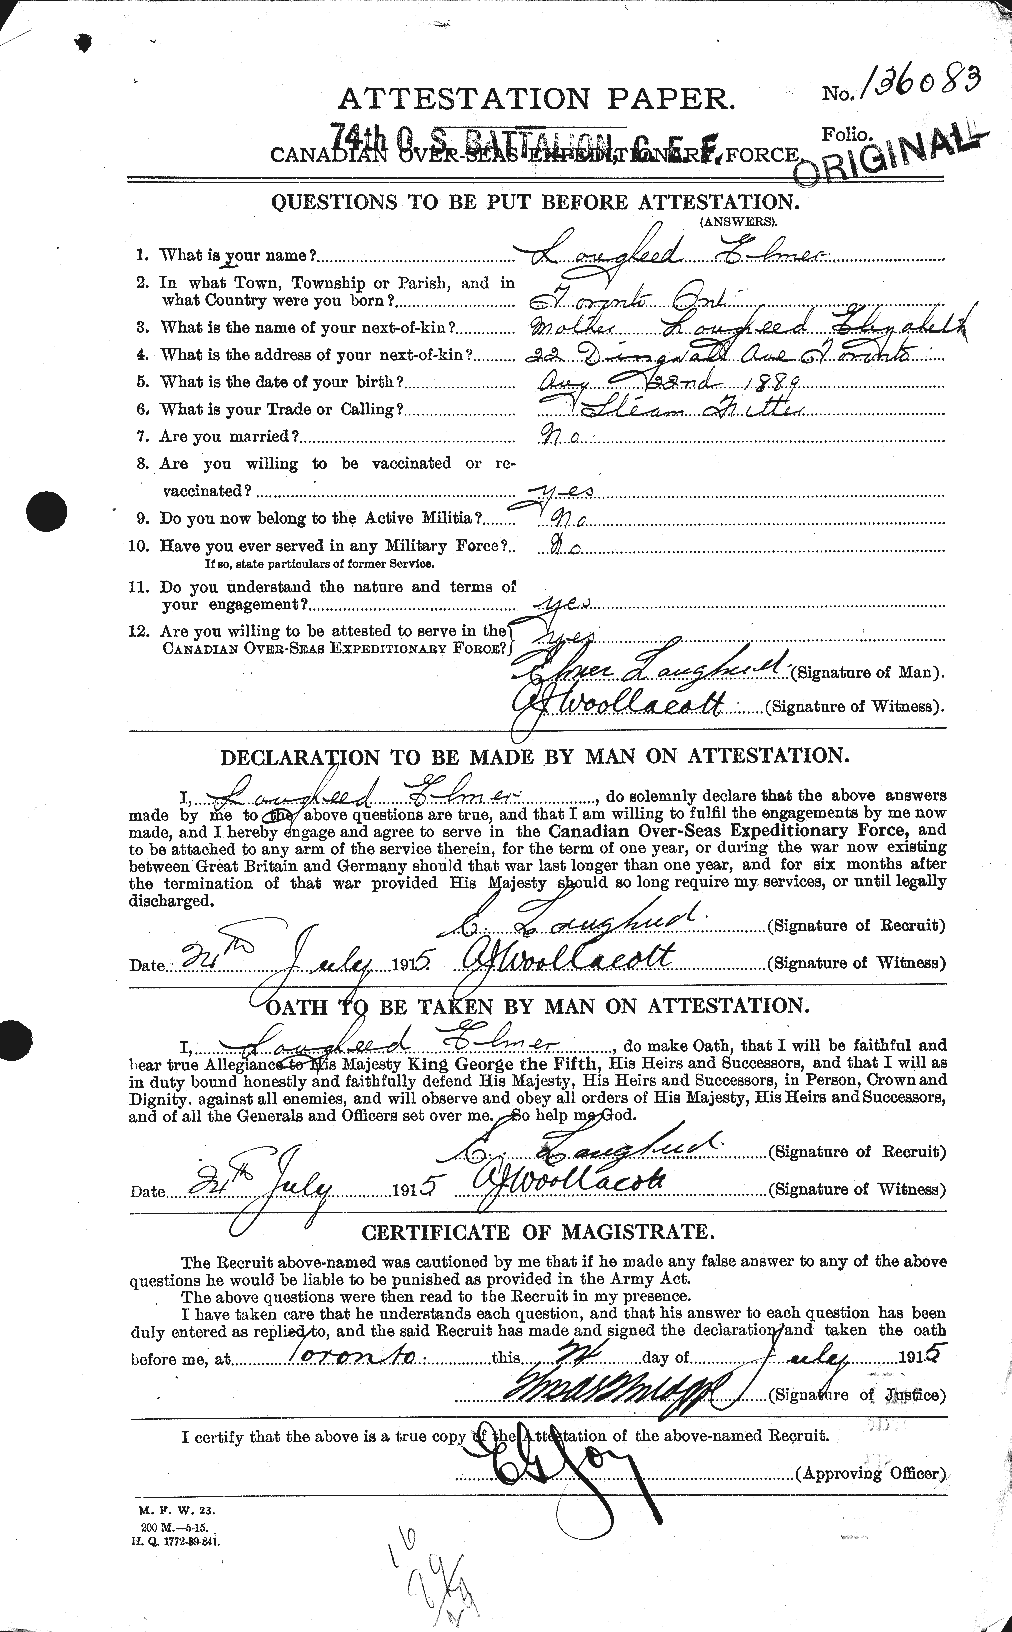 Personnel Records of the First World War - CEF 470393a